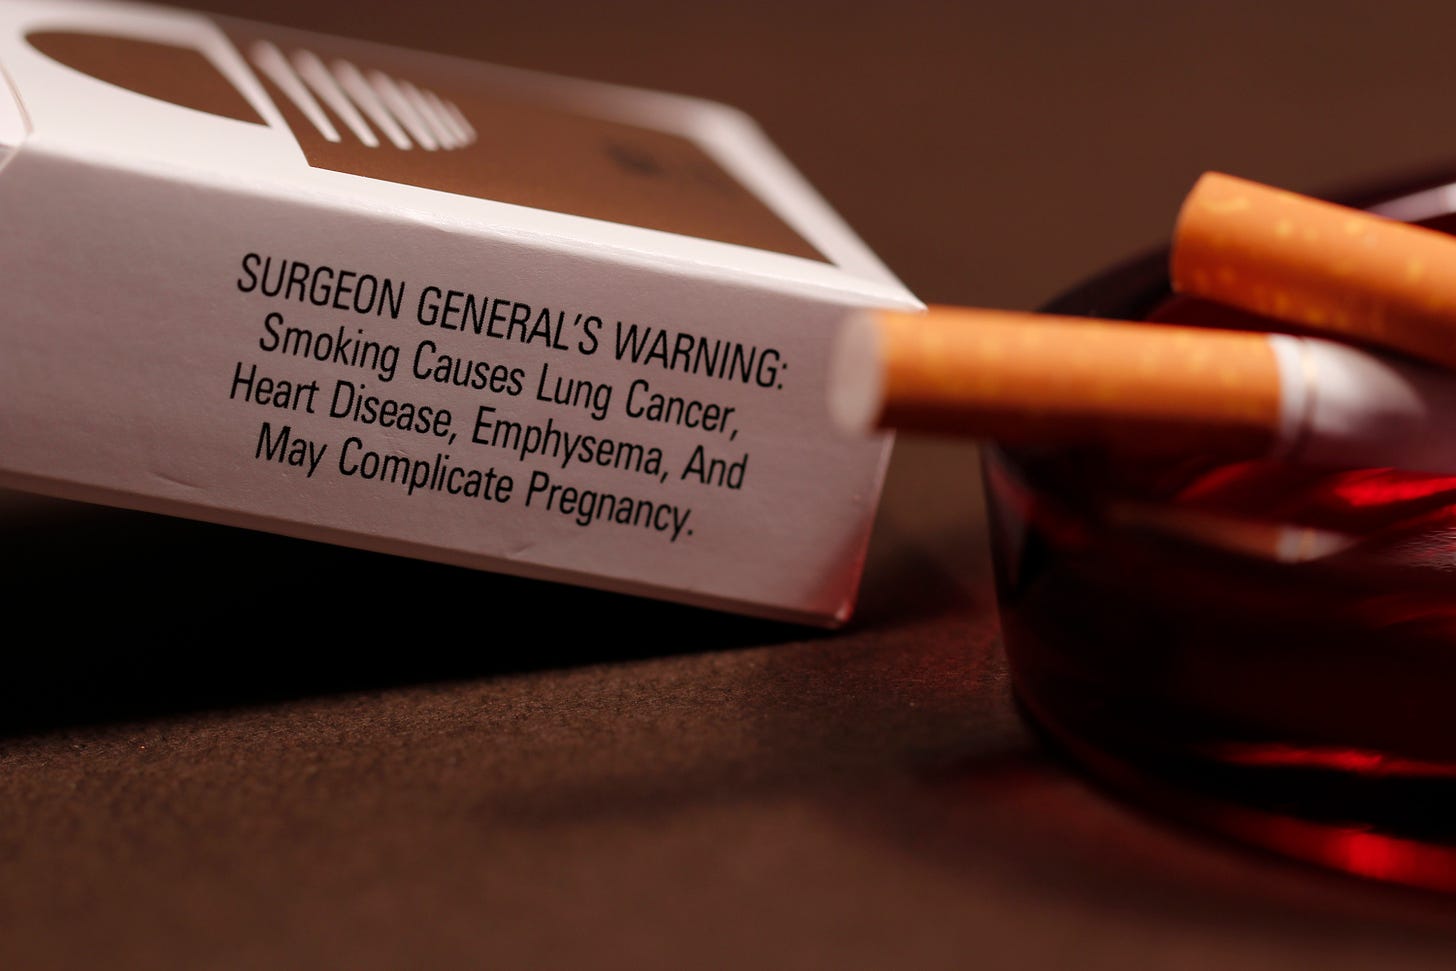 History of warning labels in the US - Wikipedia